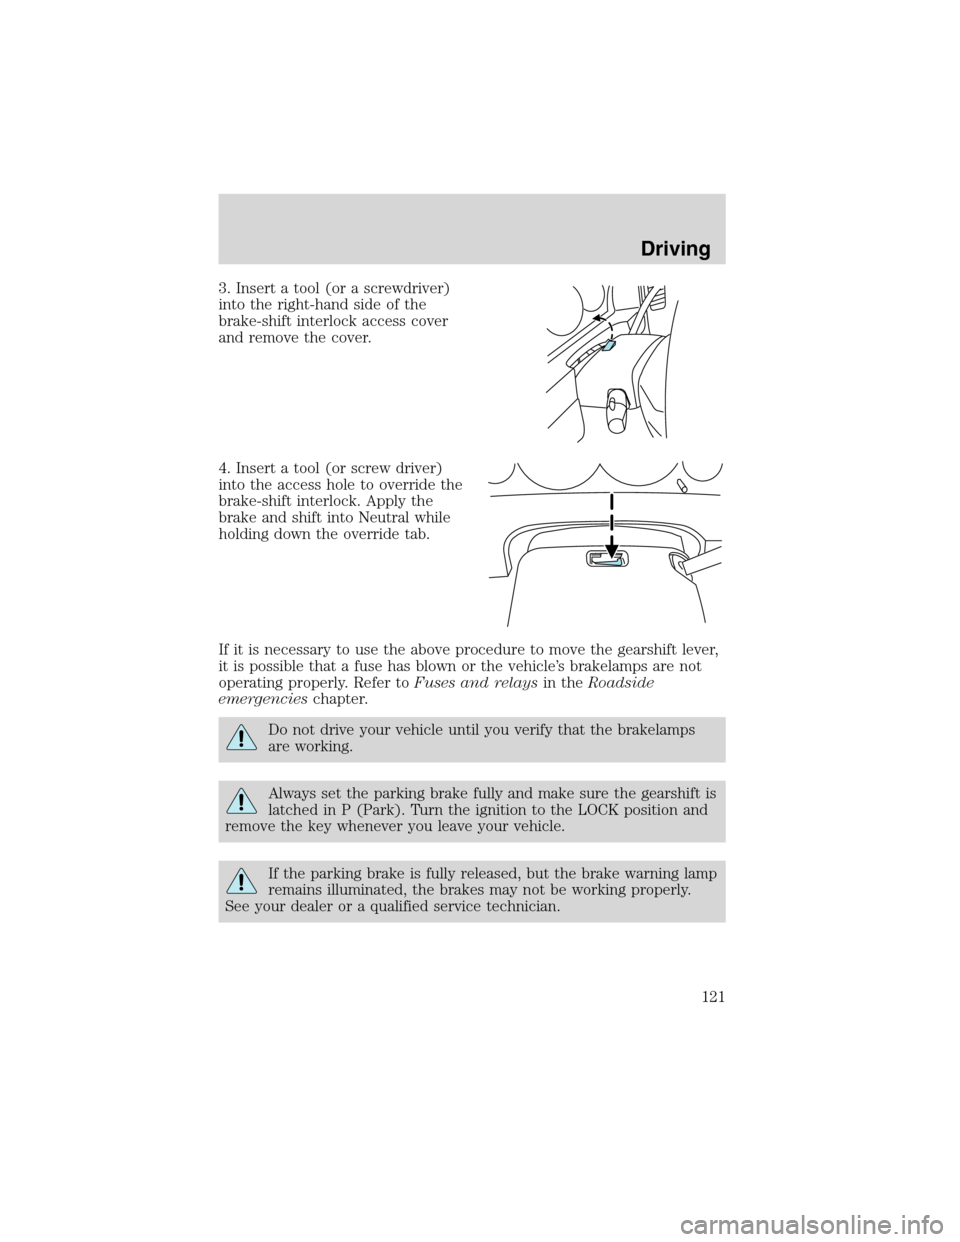 FORD ESCAPE 2003 1.G Owners Manual 3. Insert a tool (or a screwdriver)
into the right-hand side of the
brake-shift interlock access cover
and remove the cover.
4. Insert a tool (or screw driver)
into the access hole to override the
bra